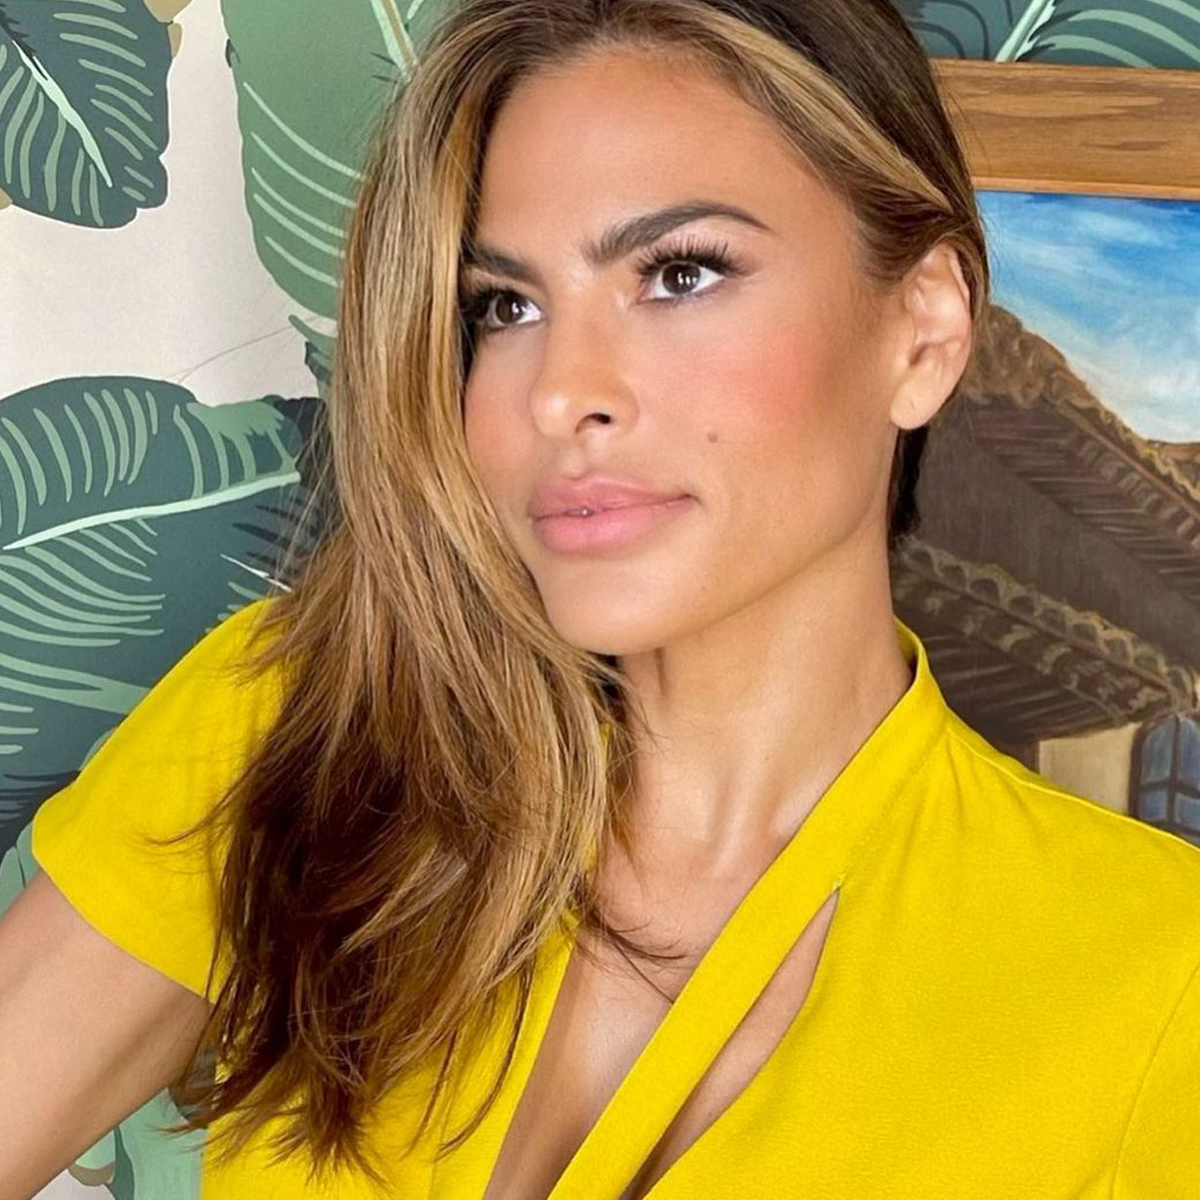 Eva Mendes Debuts Fiery Red Hair in Must-See Transformation Photo